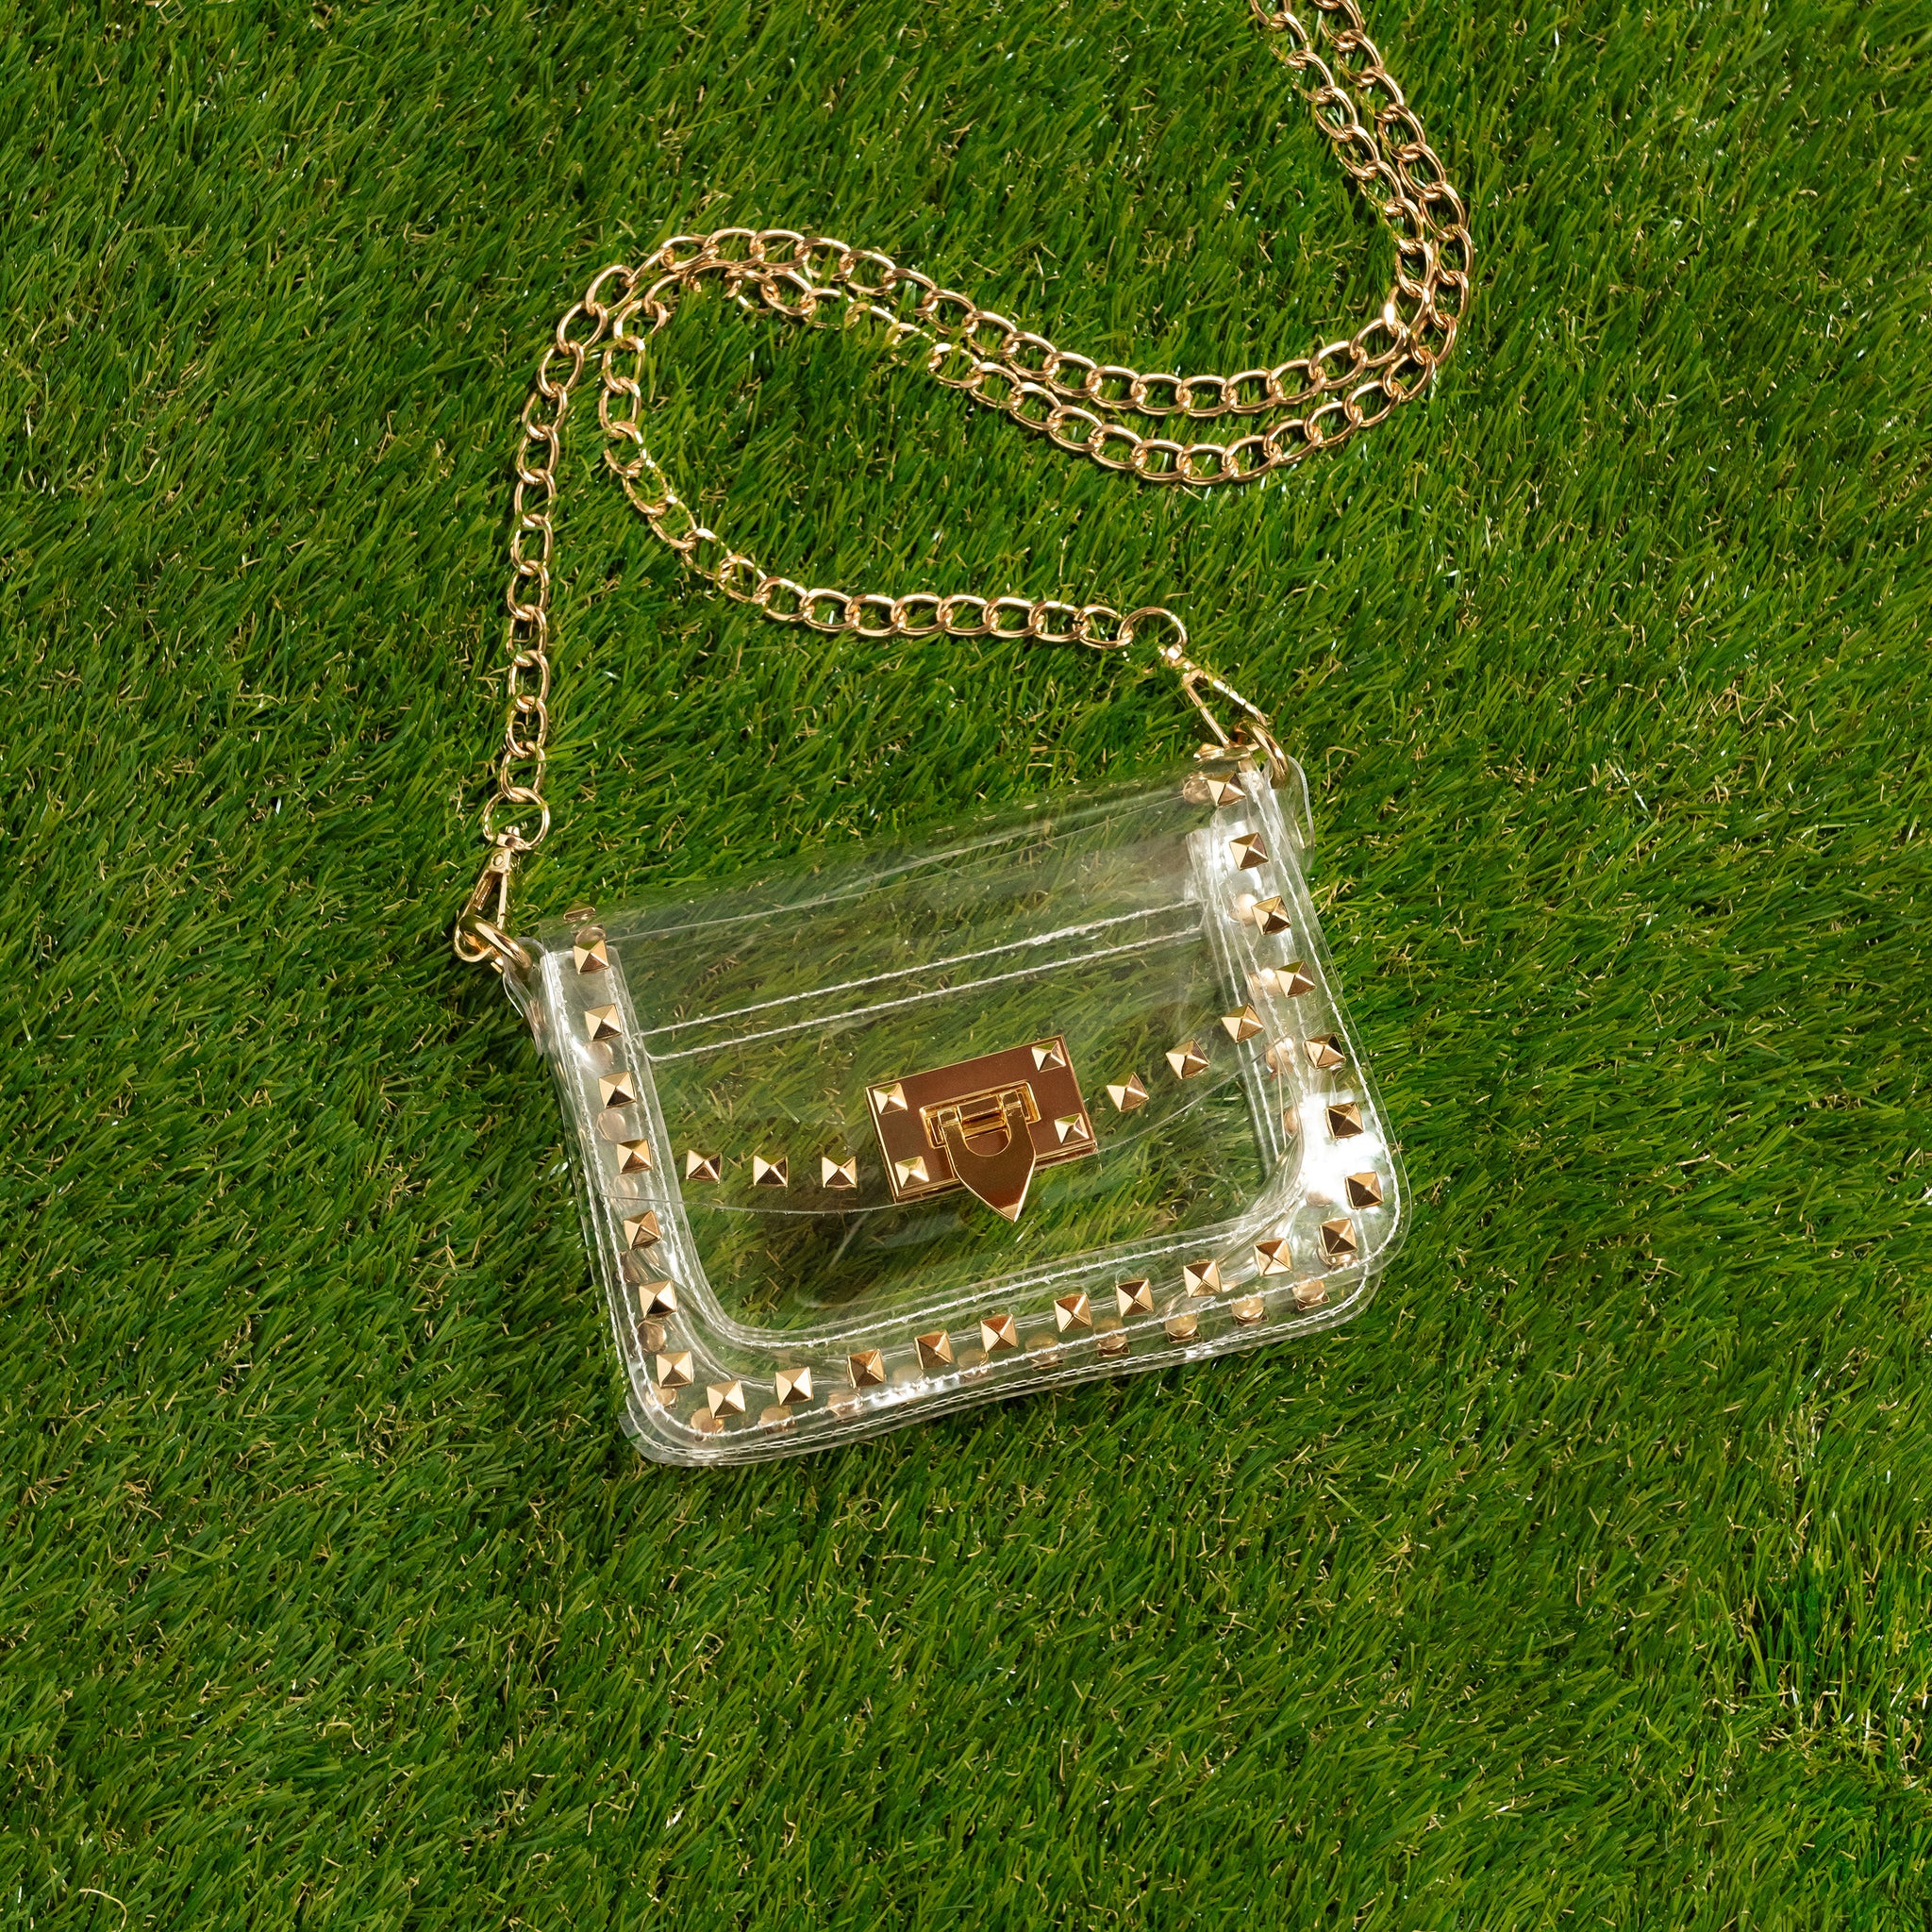 The Columbus Clear Small Studded Bag